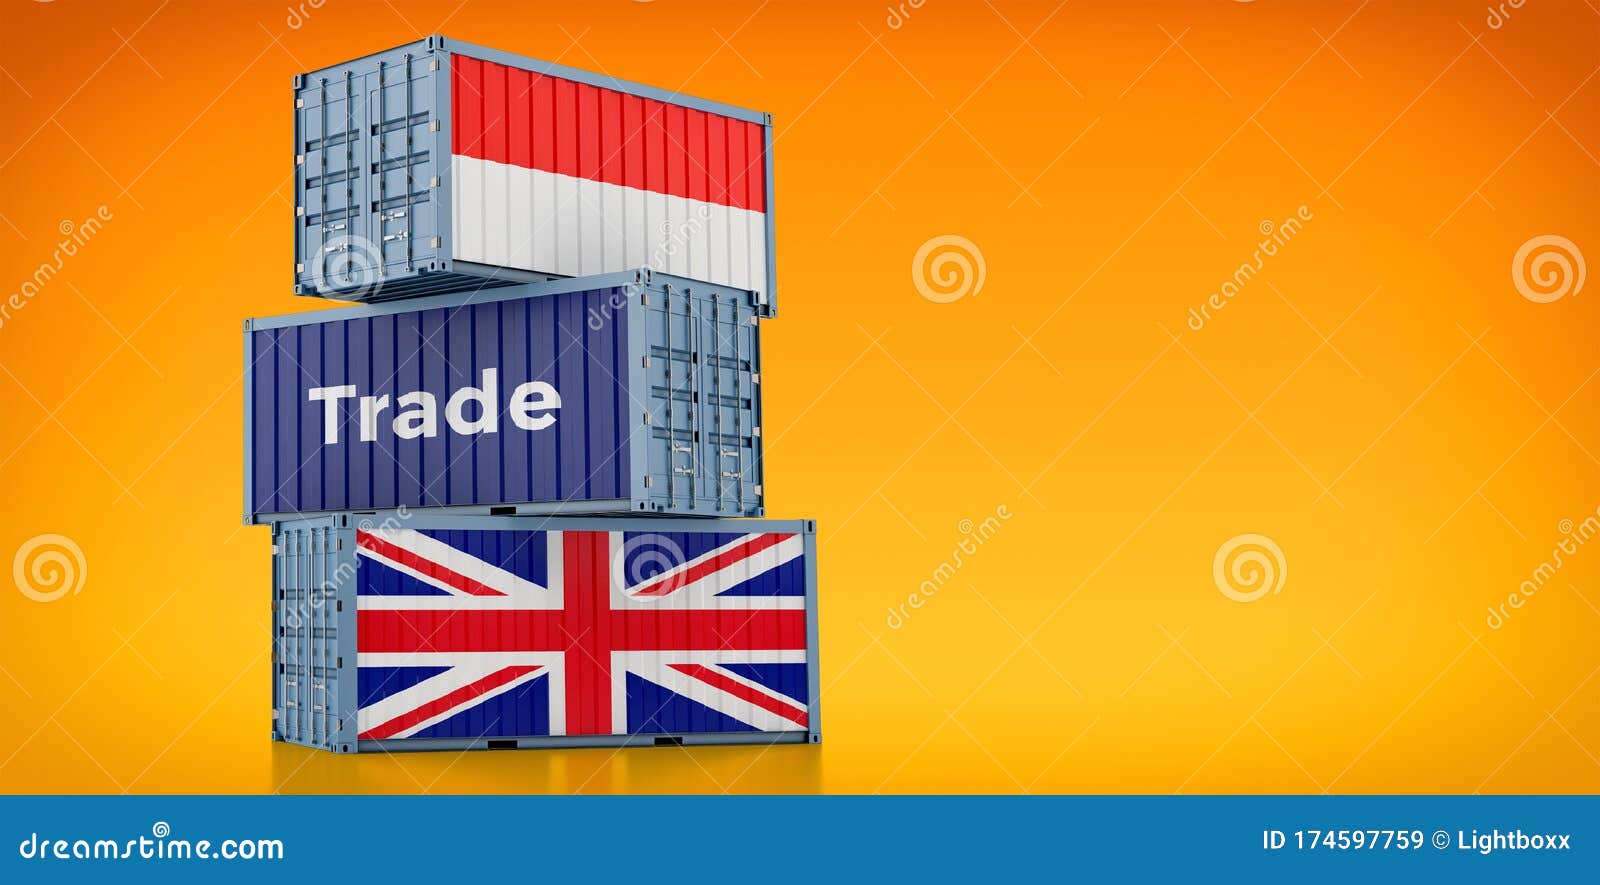 Freight Containers With United Kingdom And Indonesia Flag Stock Illustration Illustration Of Goods Storage